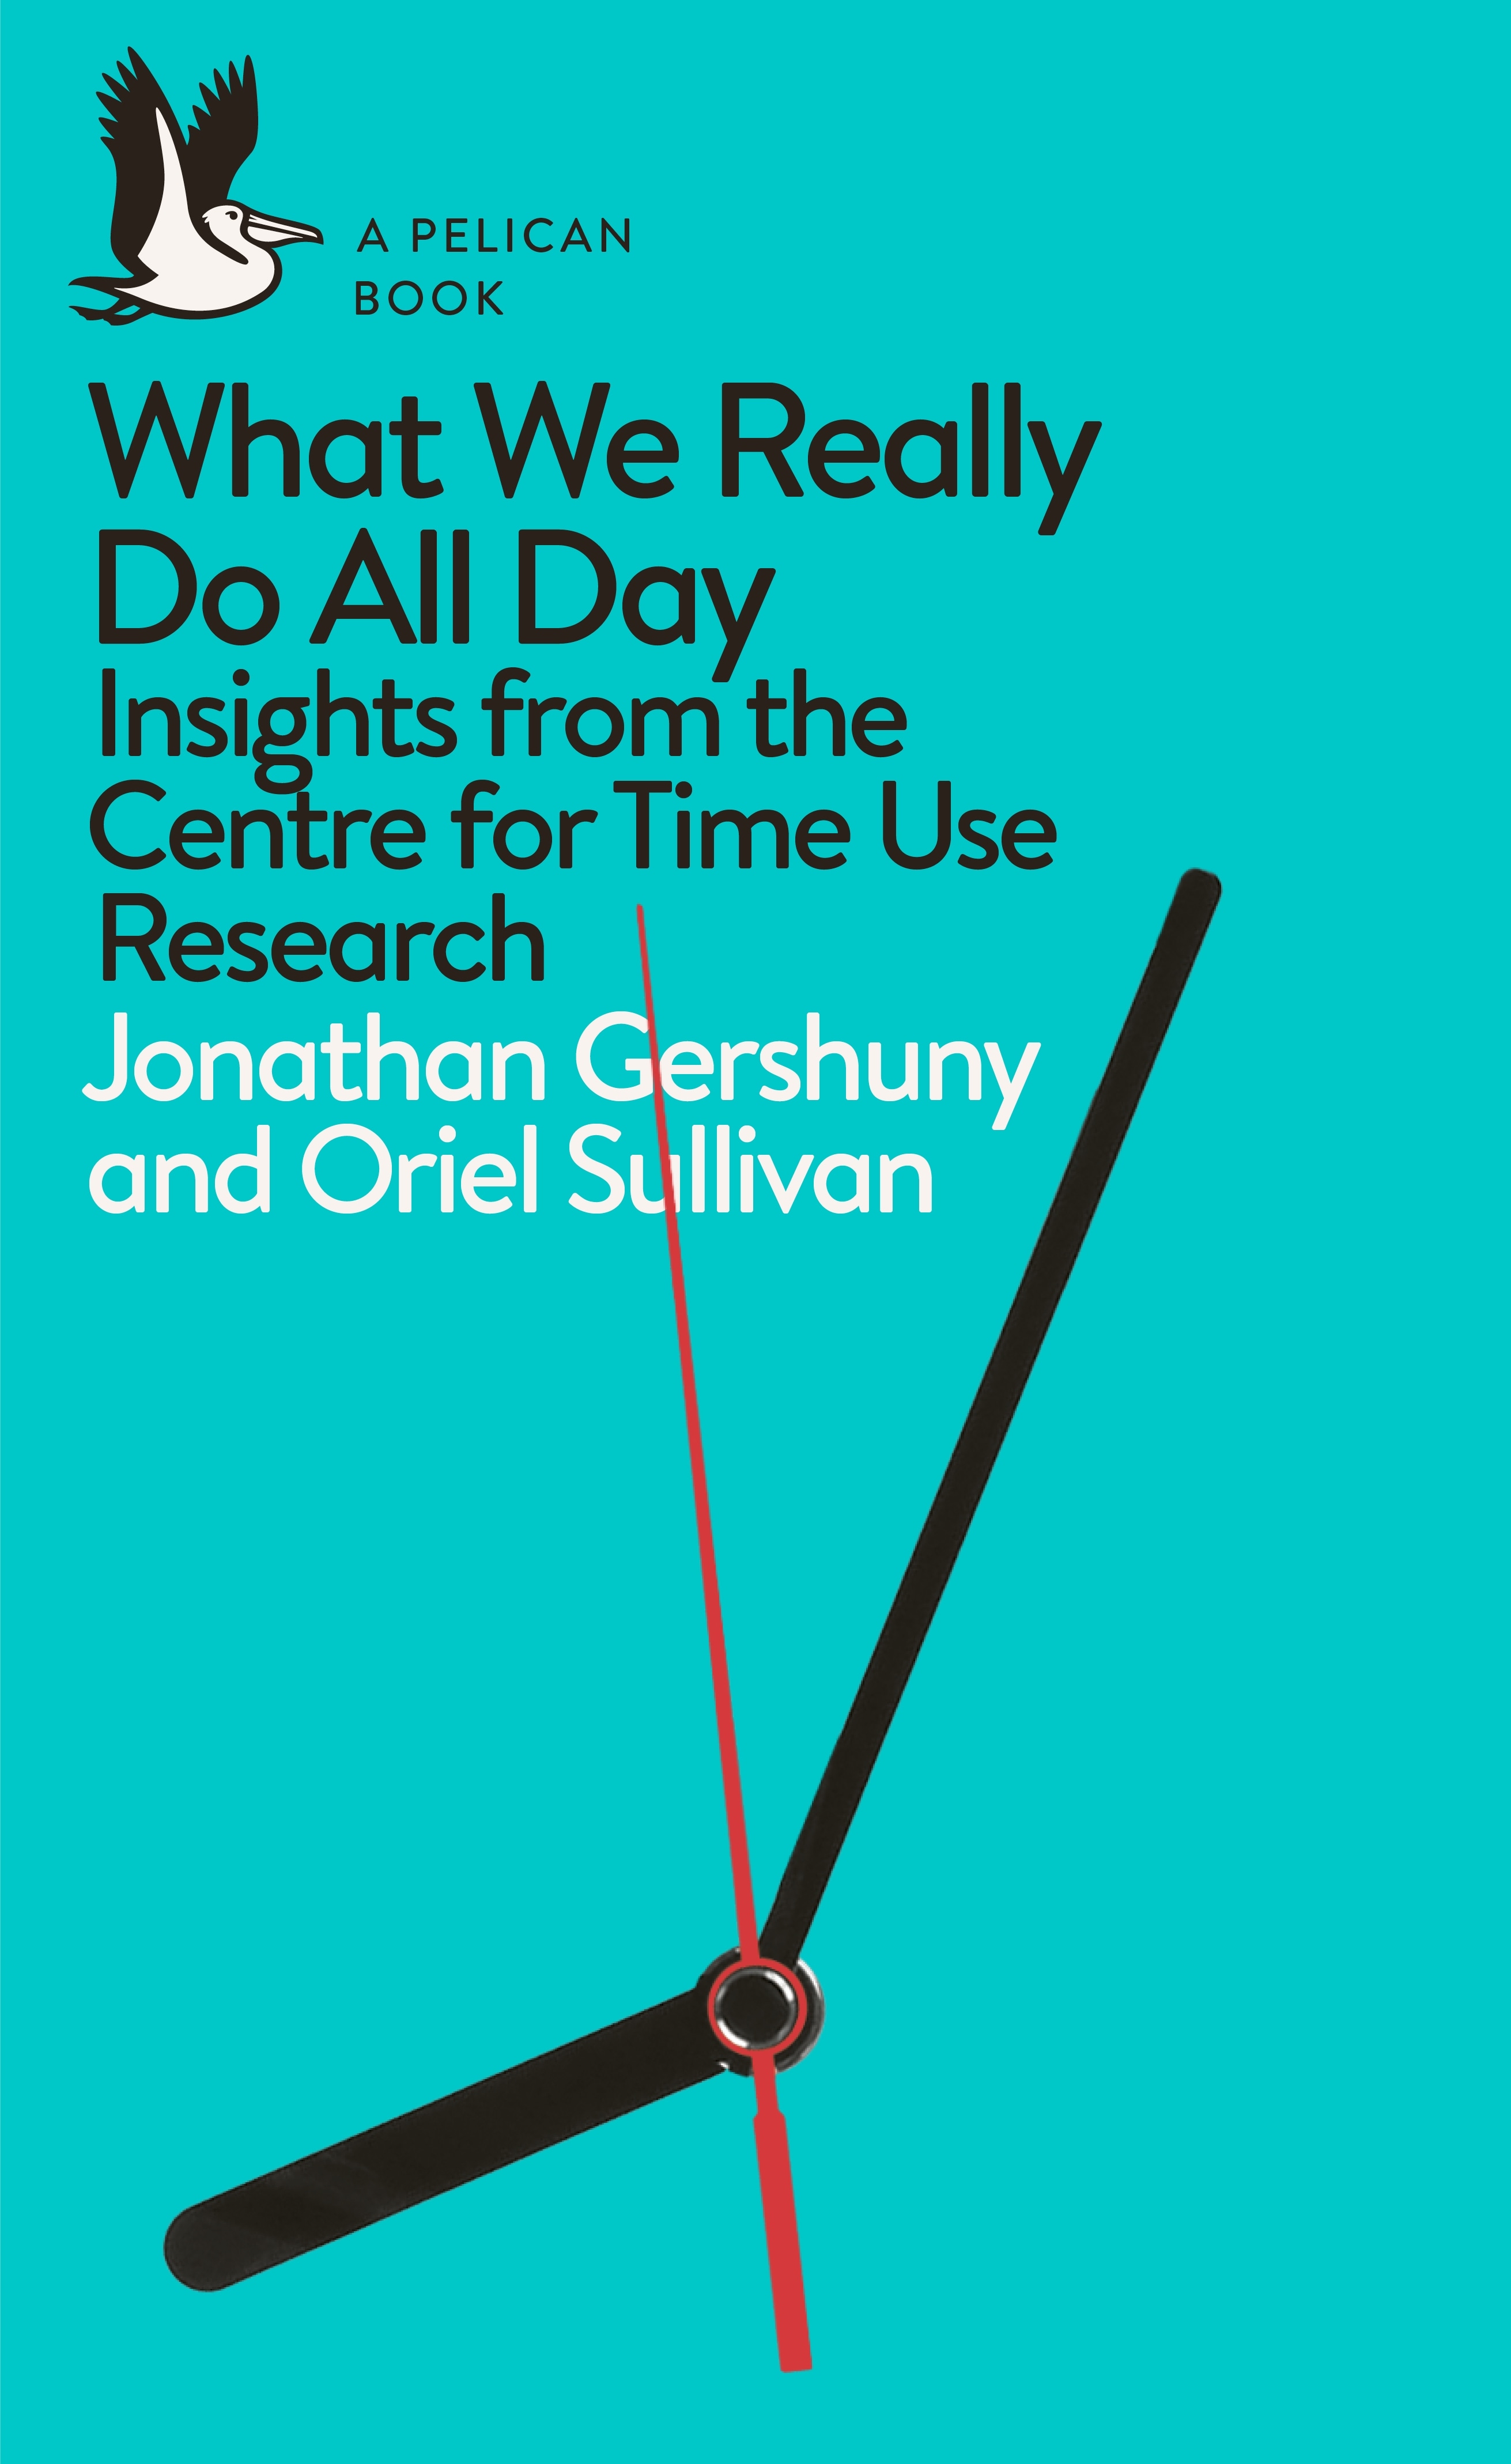 Book “What We Really Do All Day” by Jonathan Gershuny, Oriel Sullivan — June 27, 2019